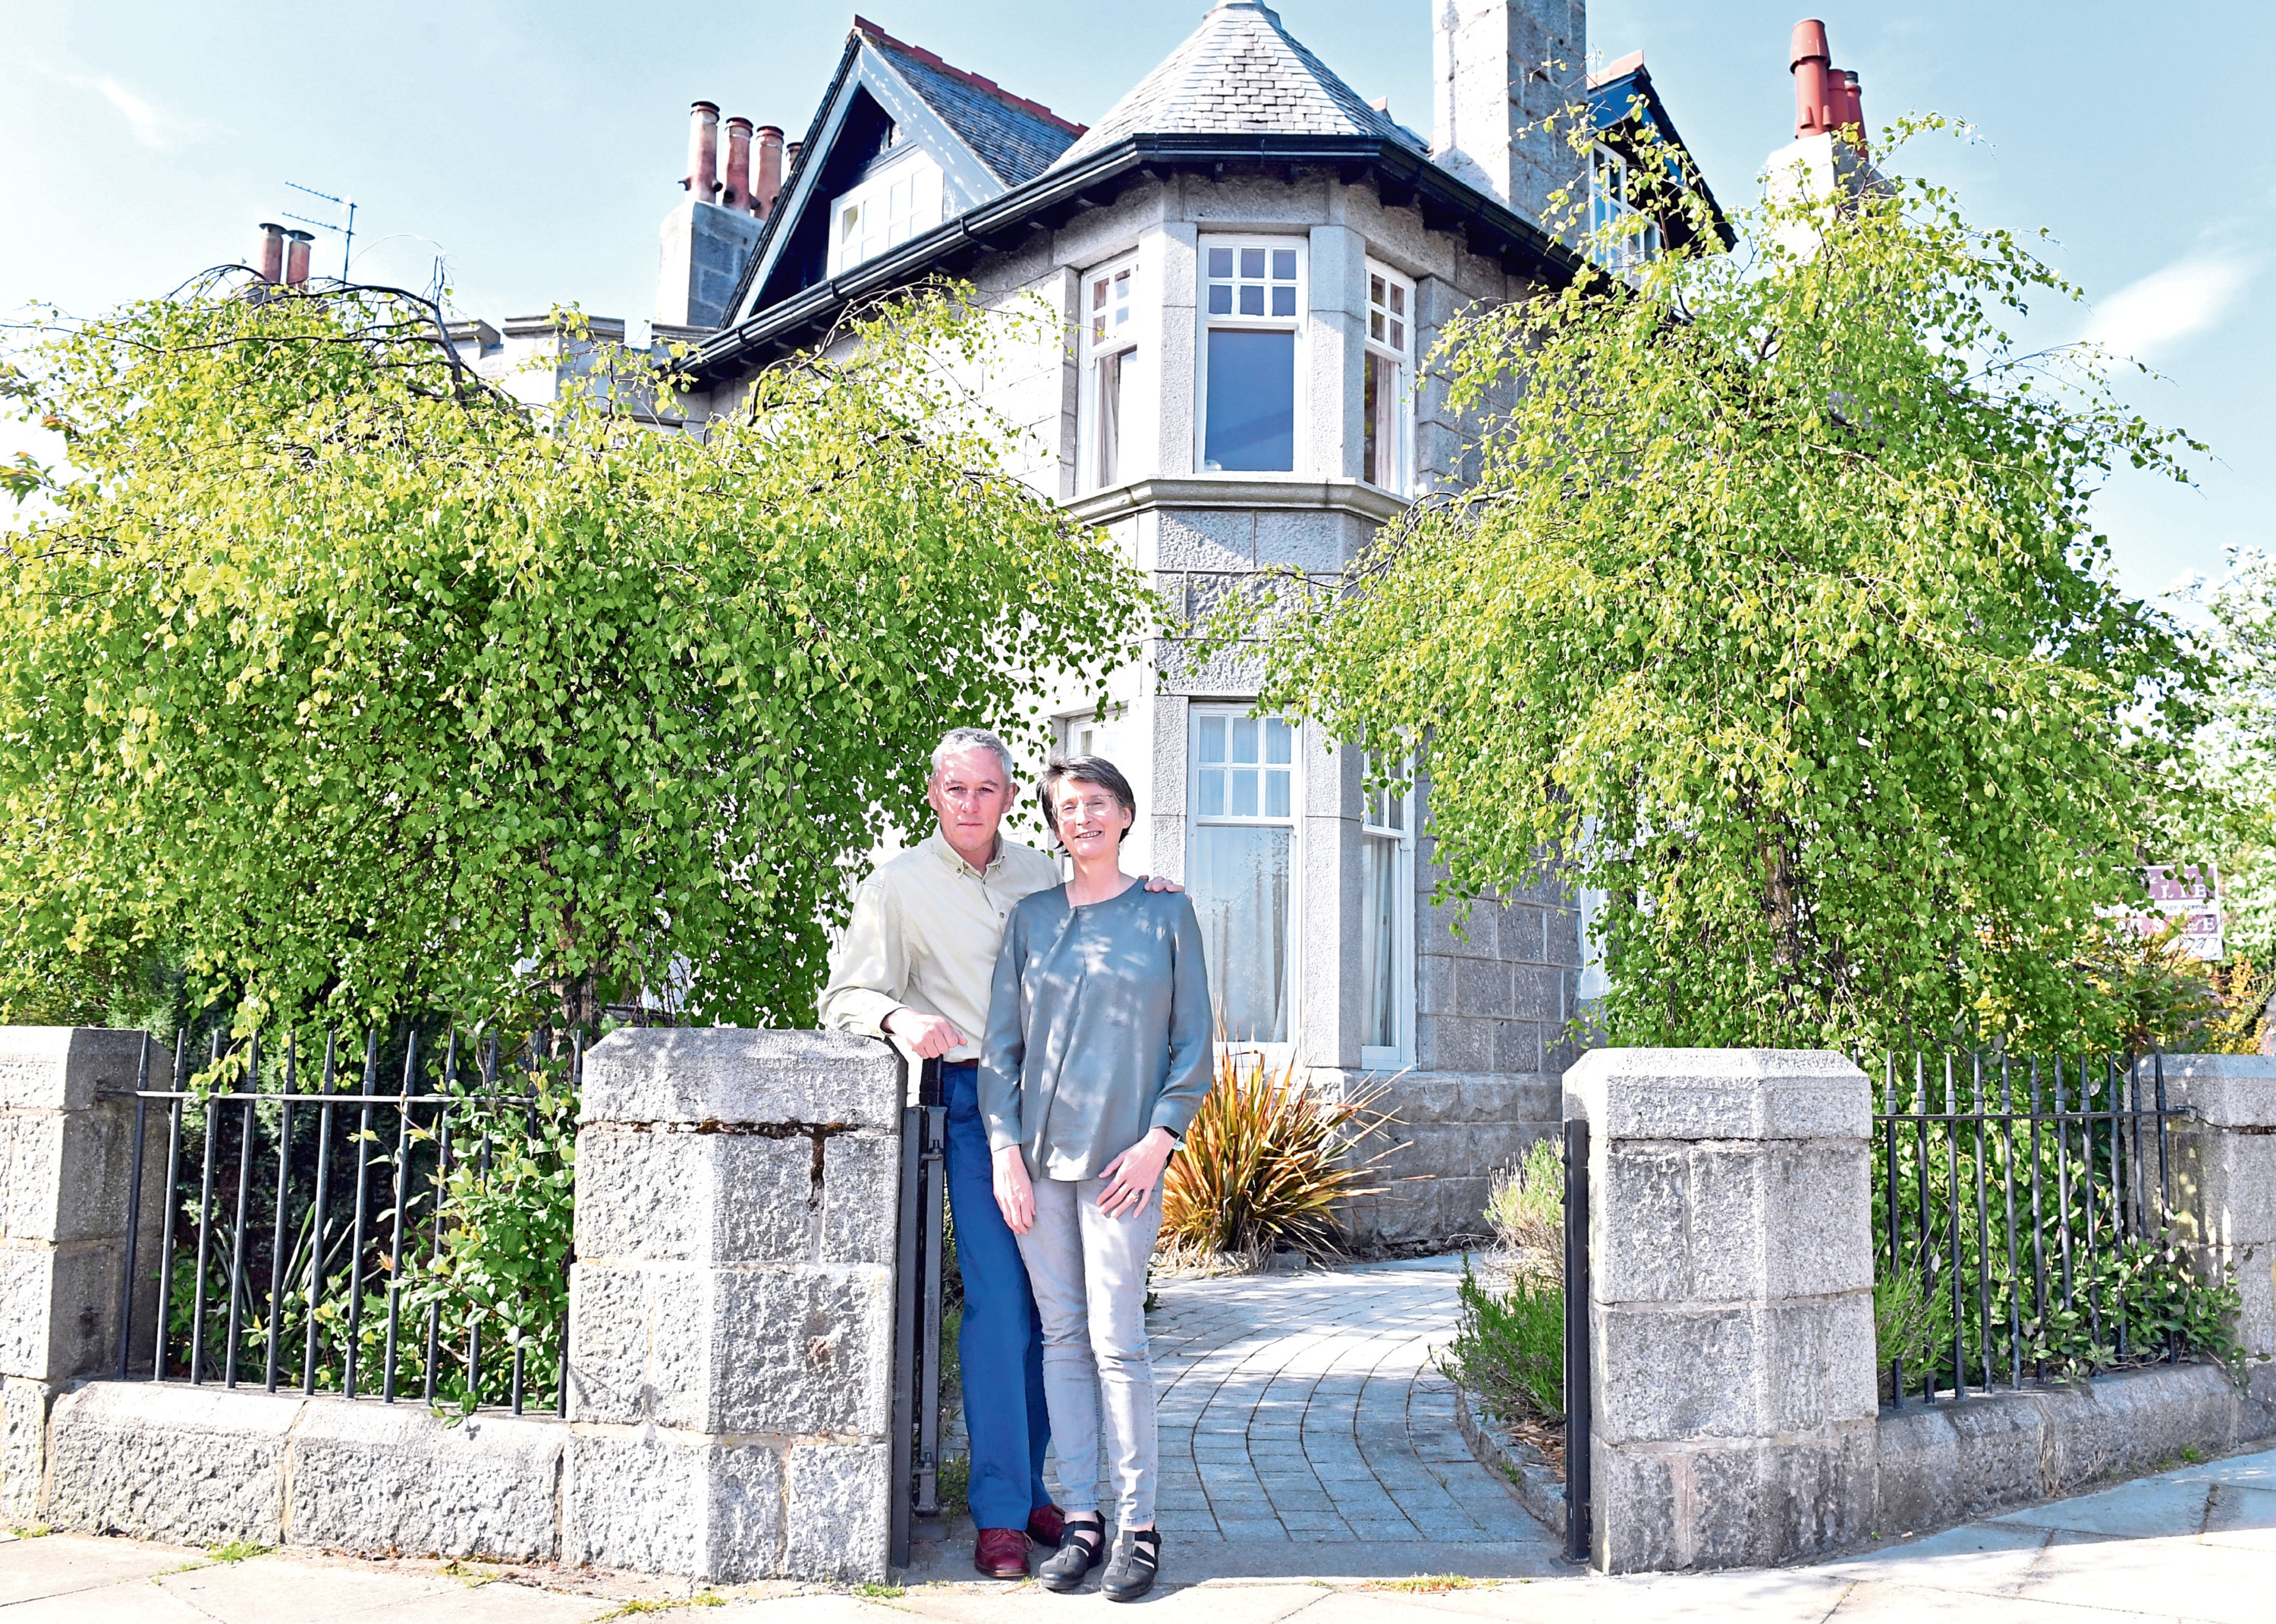 Lindsay and Margaret say leaving 2 Fonthill Terrace, will mark 'the end of an era'